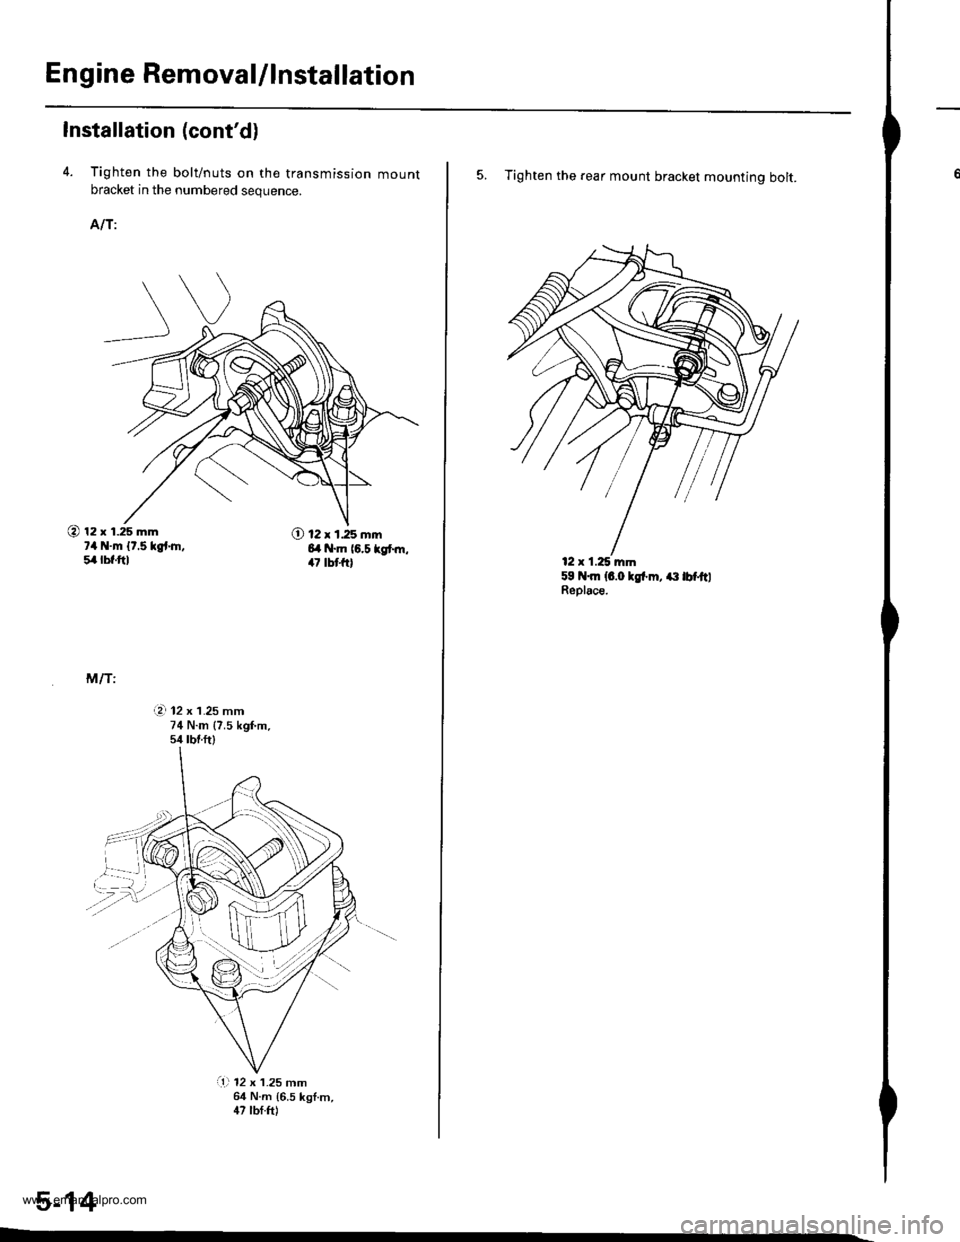 HONDA CR-V 1999 RD1-RD3 / 1.G Workshop Manual 
En gine RemovaUlnstallation
Installation (contd)
4. Tighten the bolt/nuts on the transmission mountbracket in the numbered sequence.
AIT:
@ 12 x 1.25 mm?4 N.m {t.5 kgt.h,5,4lbf.ftl
O 12 x 1.25 mm6l 